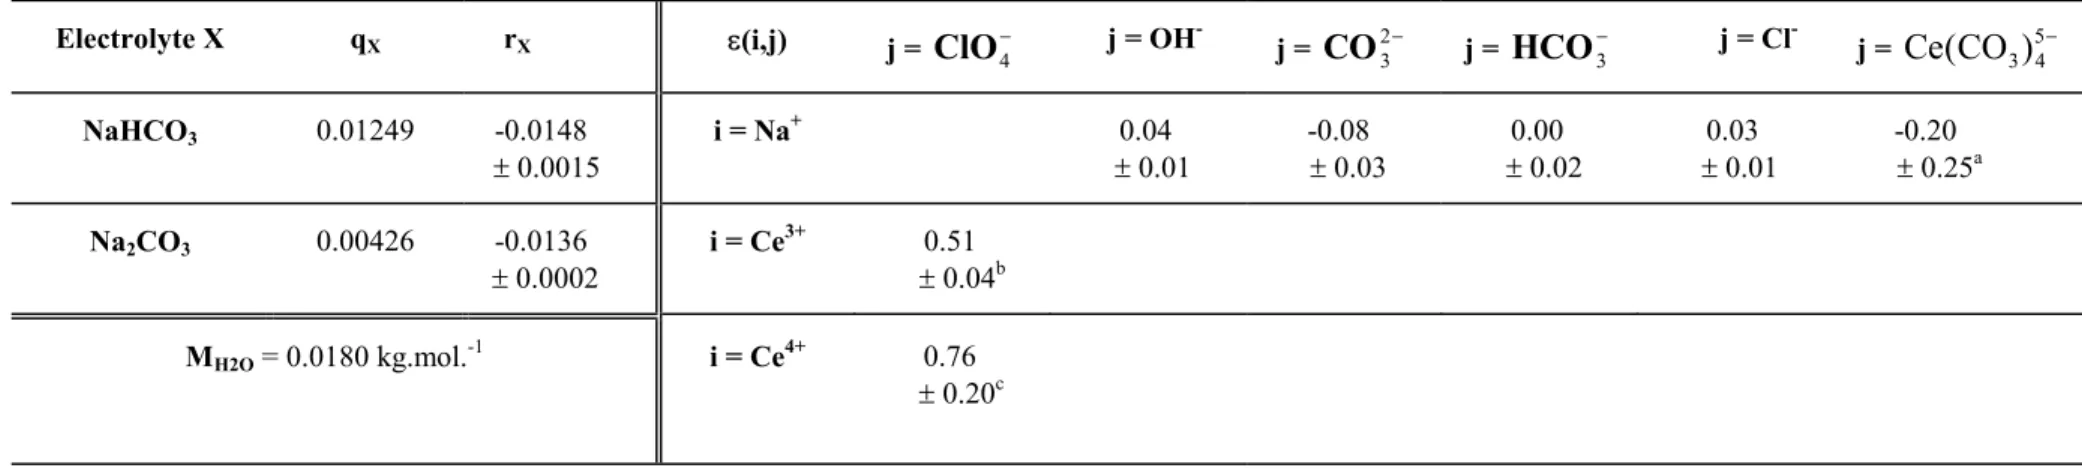 Table 1. Physical and chemical parameters used or determined in this study.